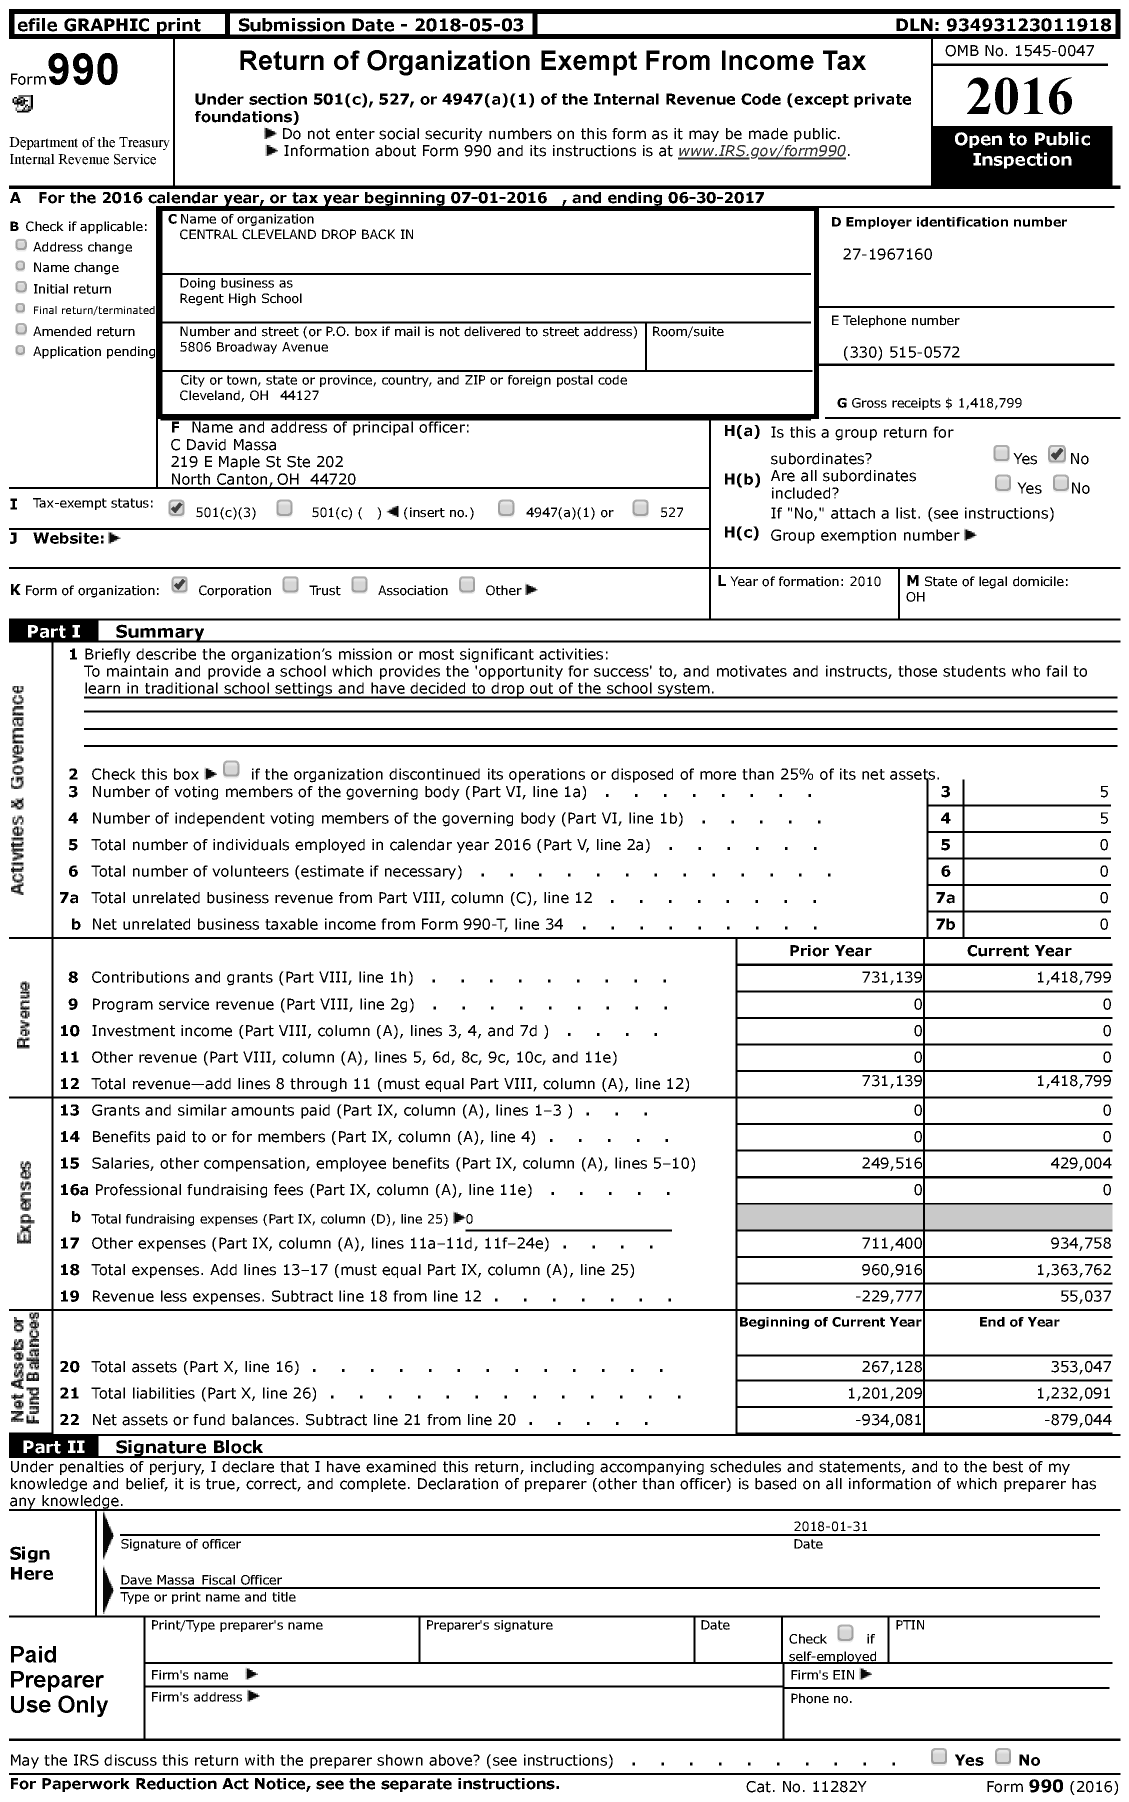 Image of first page of 2016 Form 990 for Regent High School